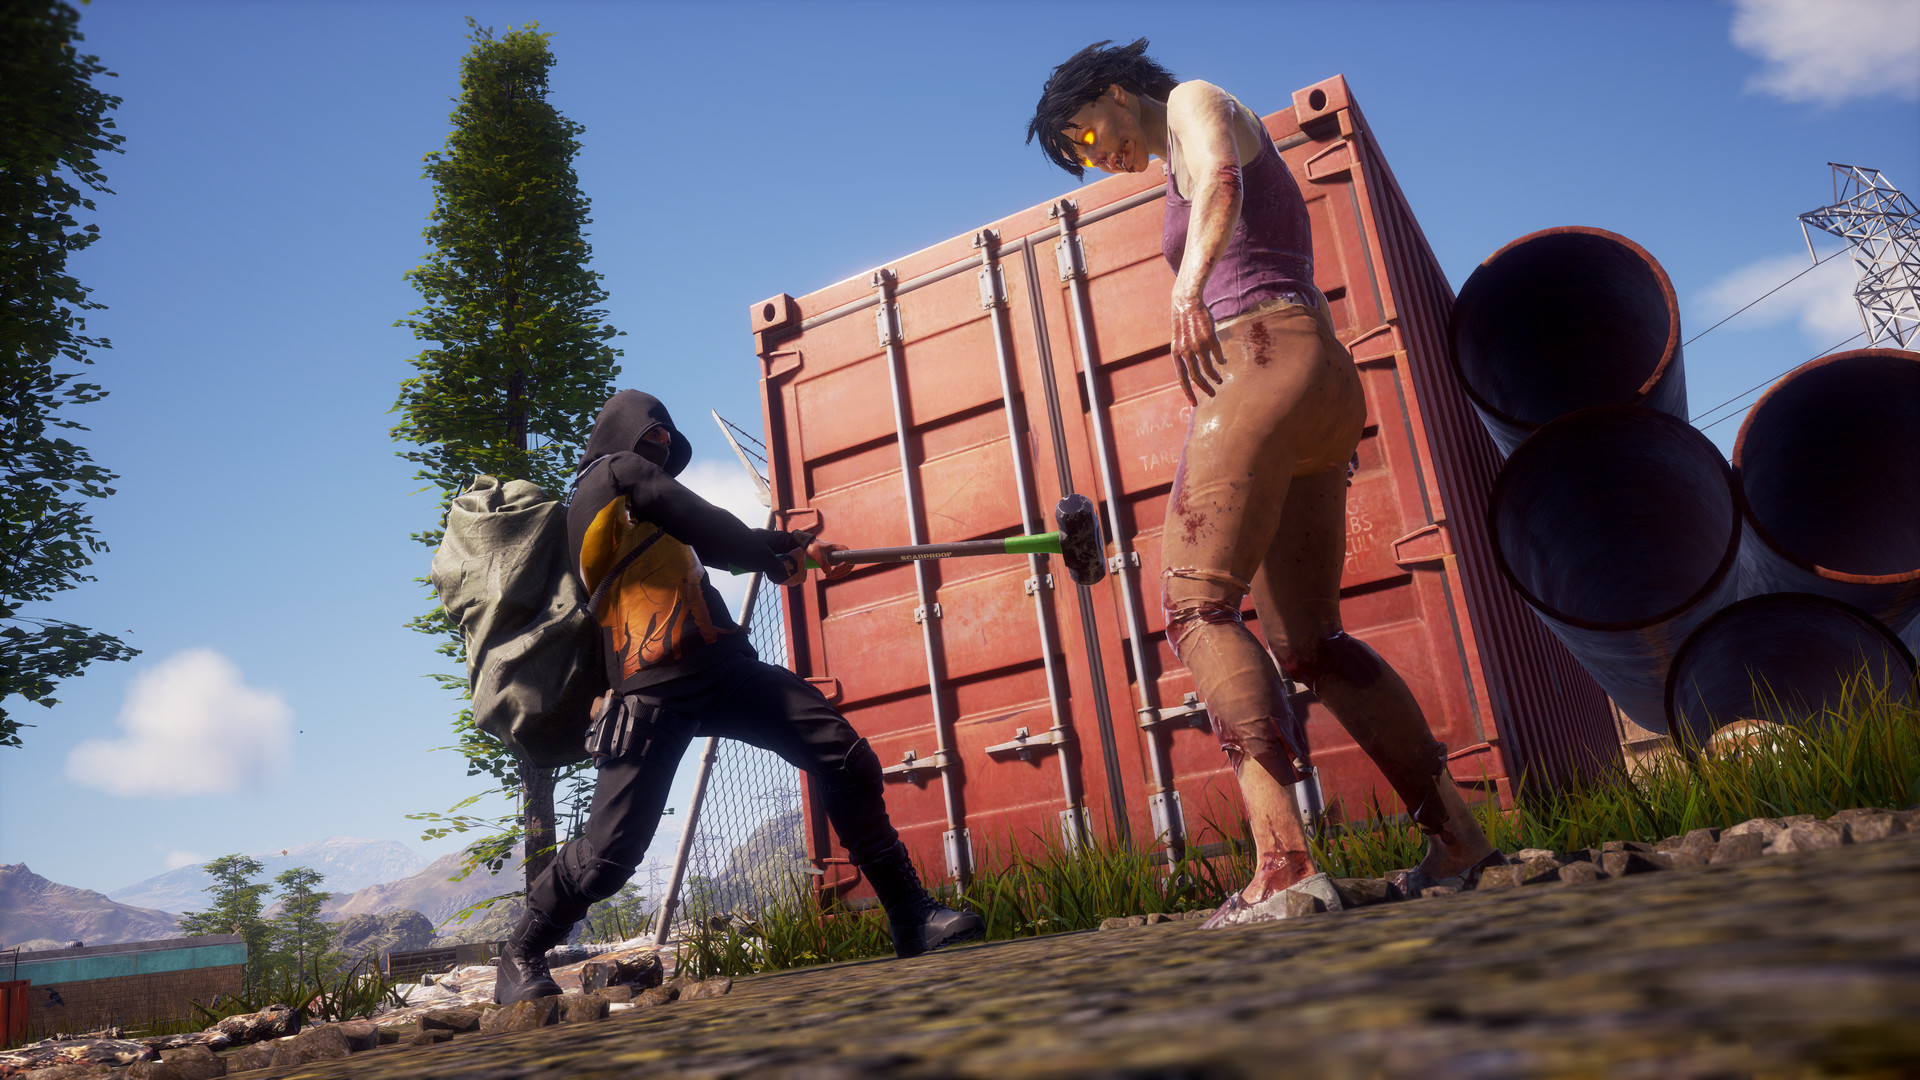 State of Decay 2: Juggernaut Edition releases 3/13; Free for owners,  includes previous DLC, new map, new weapons, Steam & EGS w/ Crossplay